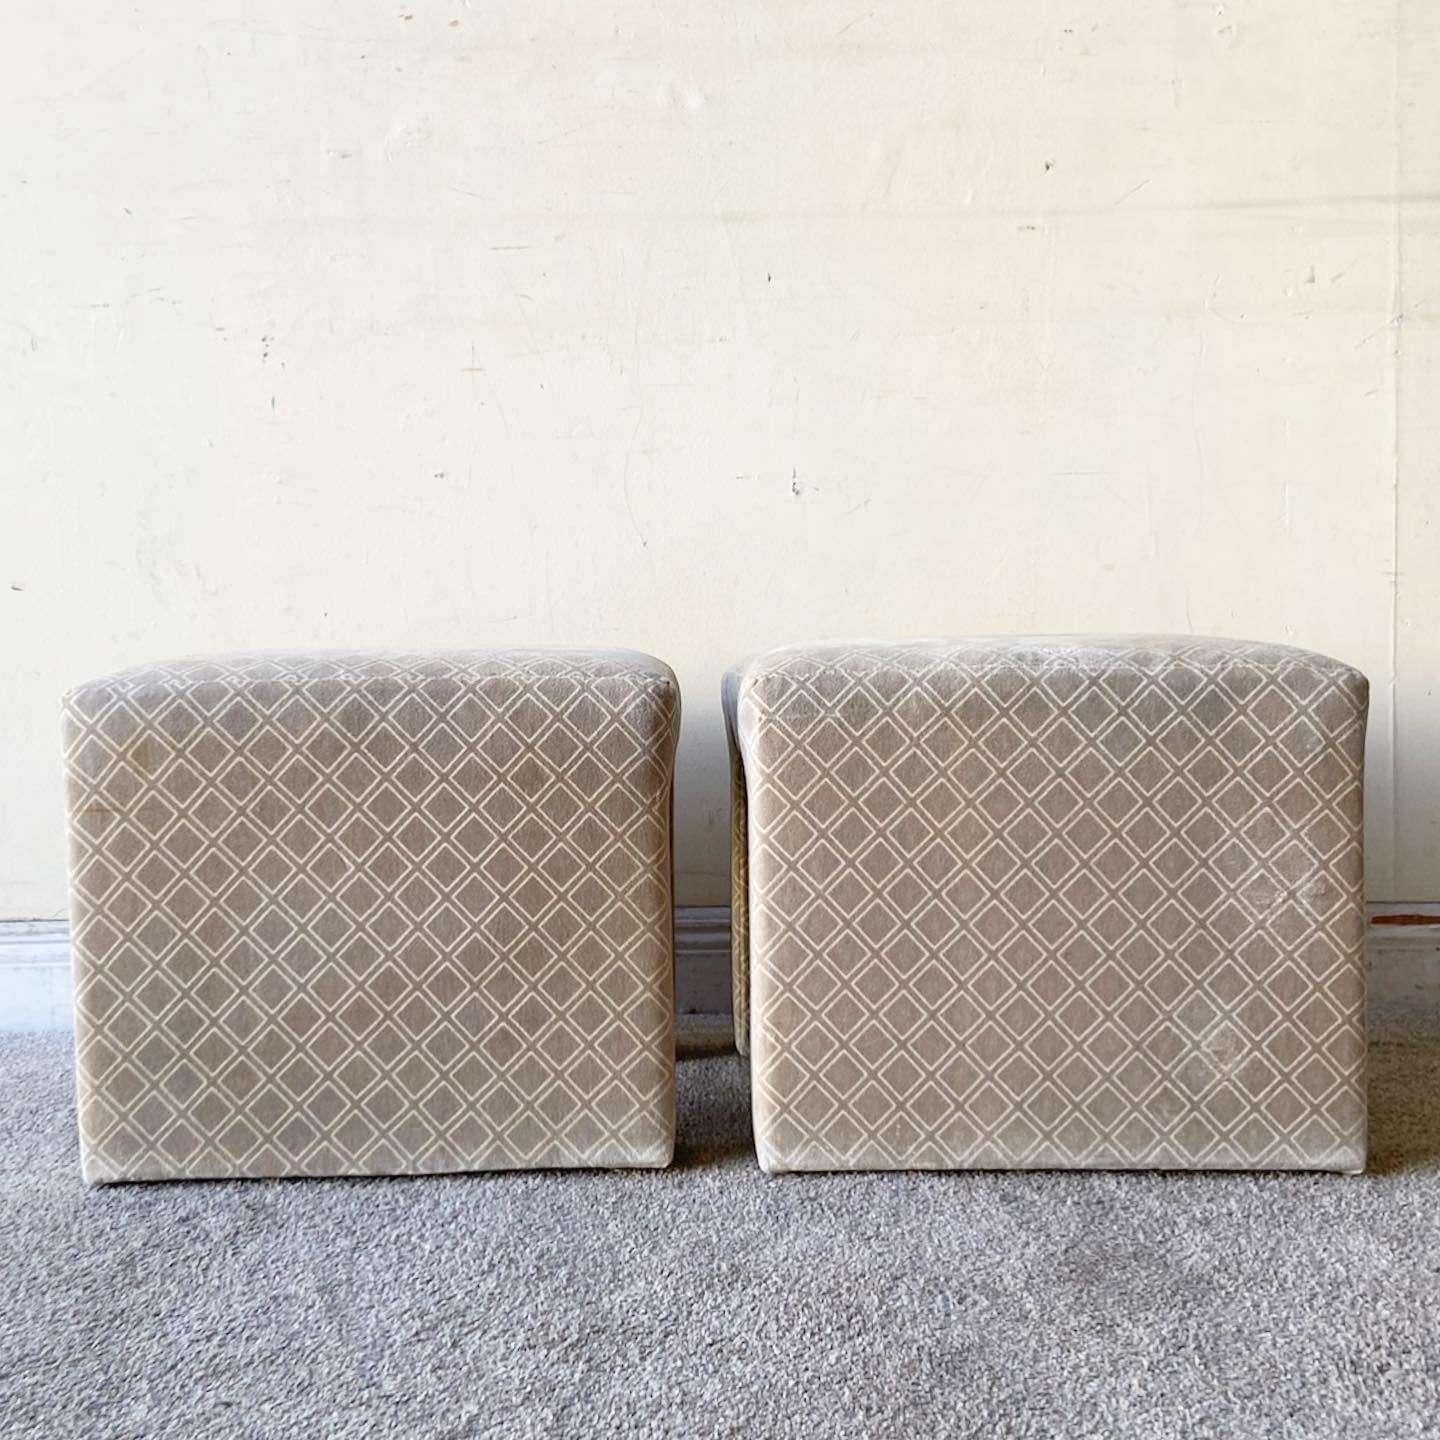 Late 20th Century Postmodern Gray Fabric Low Stools - a Pair For Sale